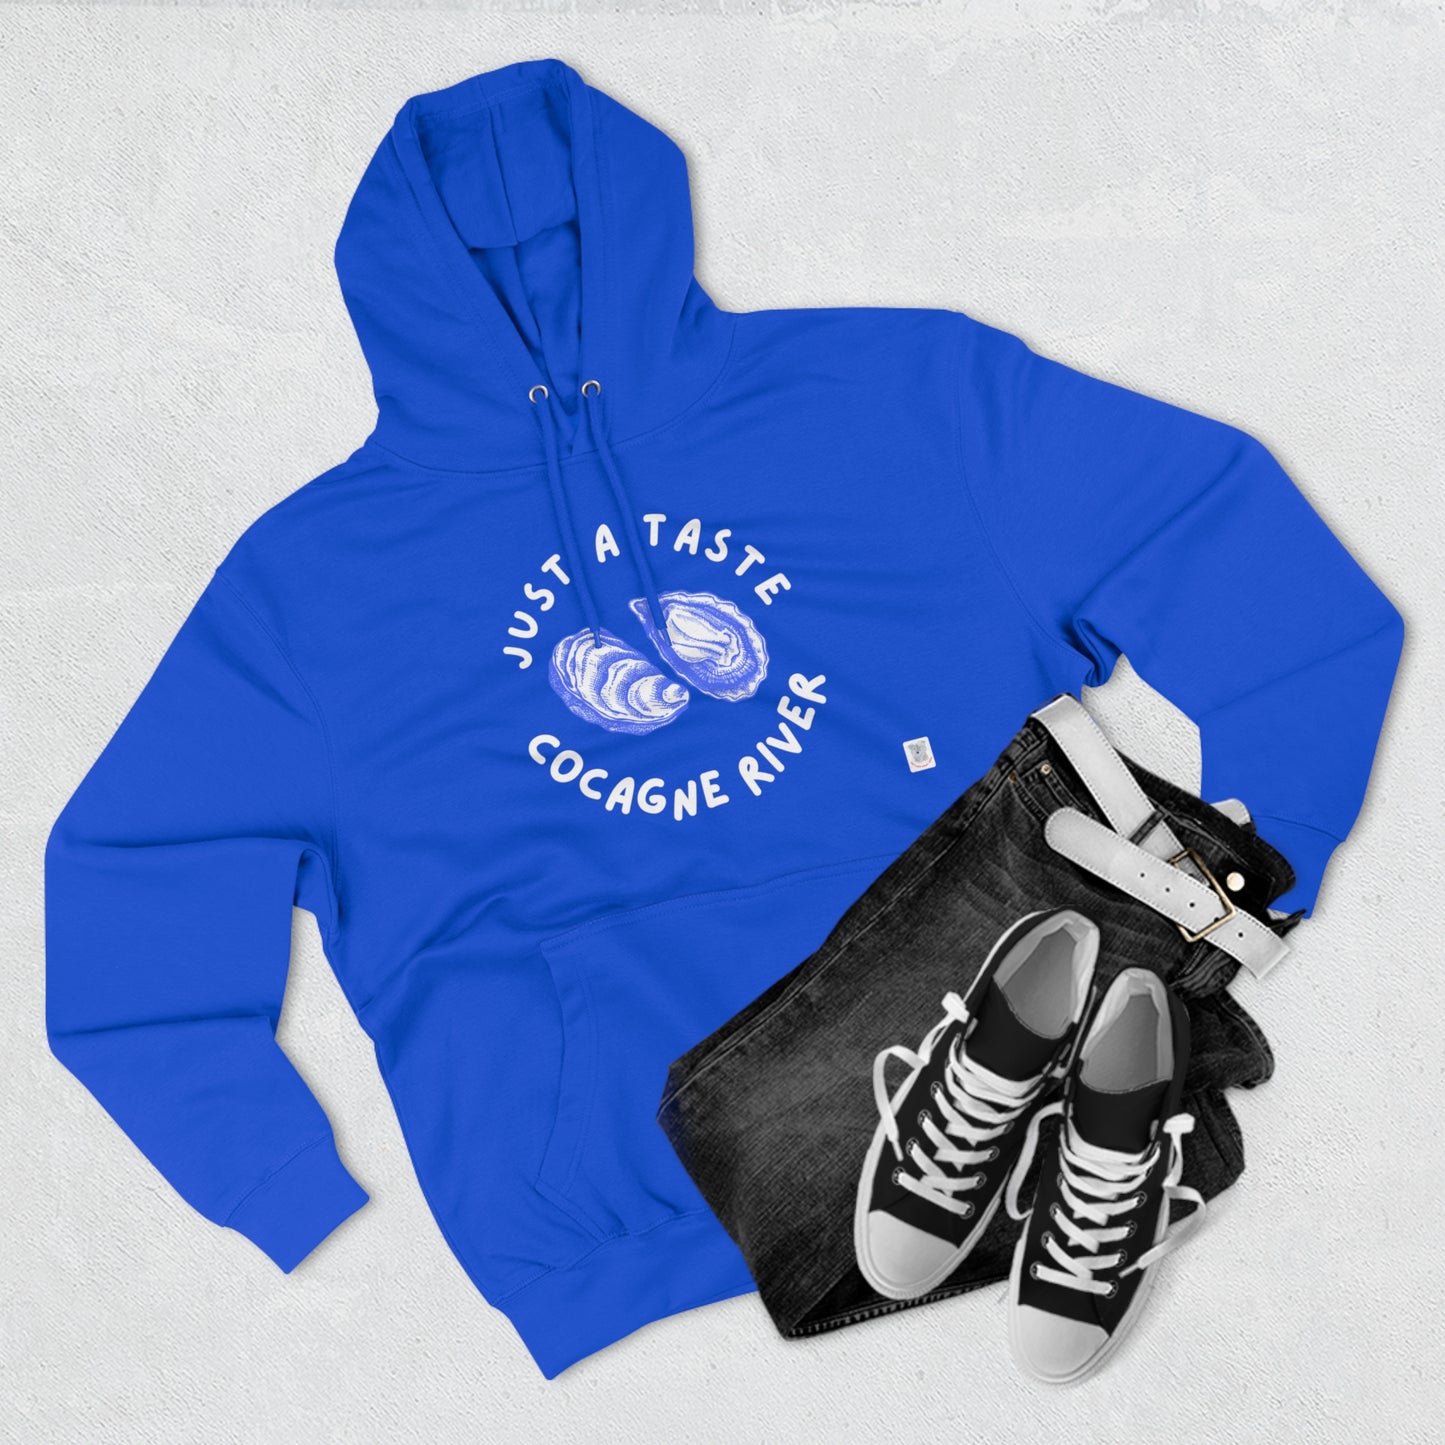 Cocagne River New Brunswick Pullover Hoodie (Navy)